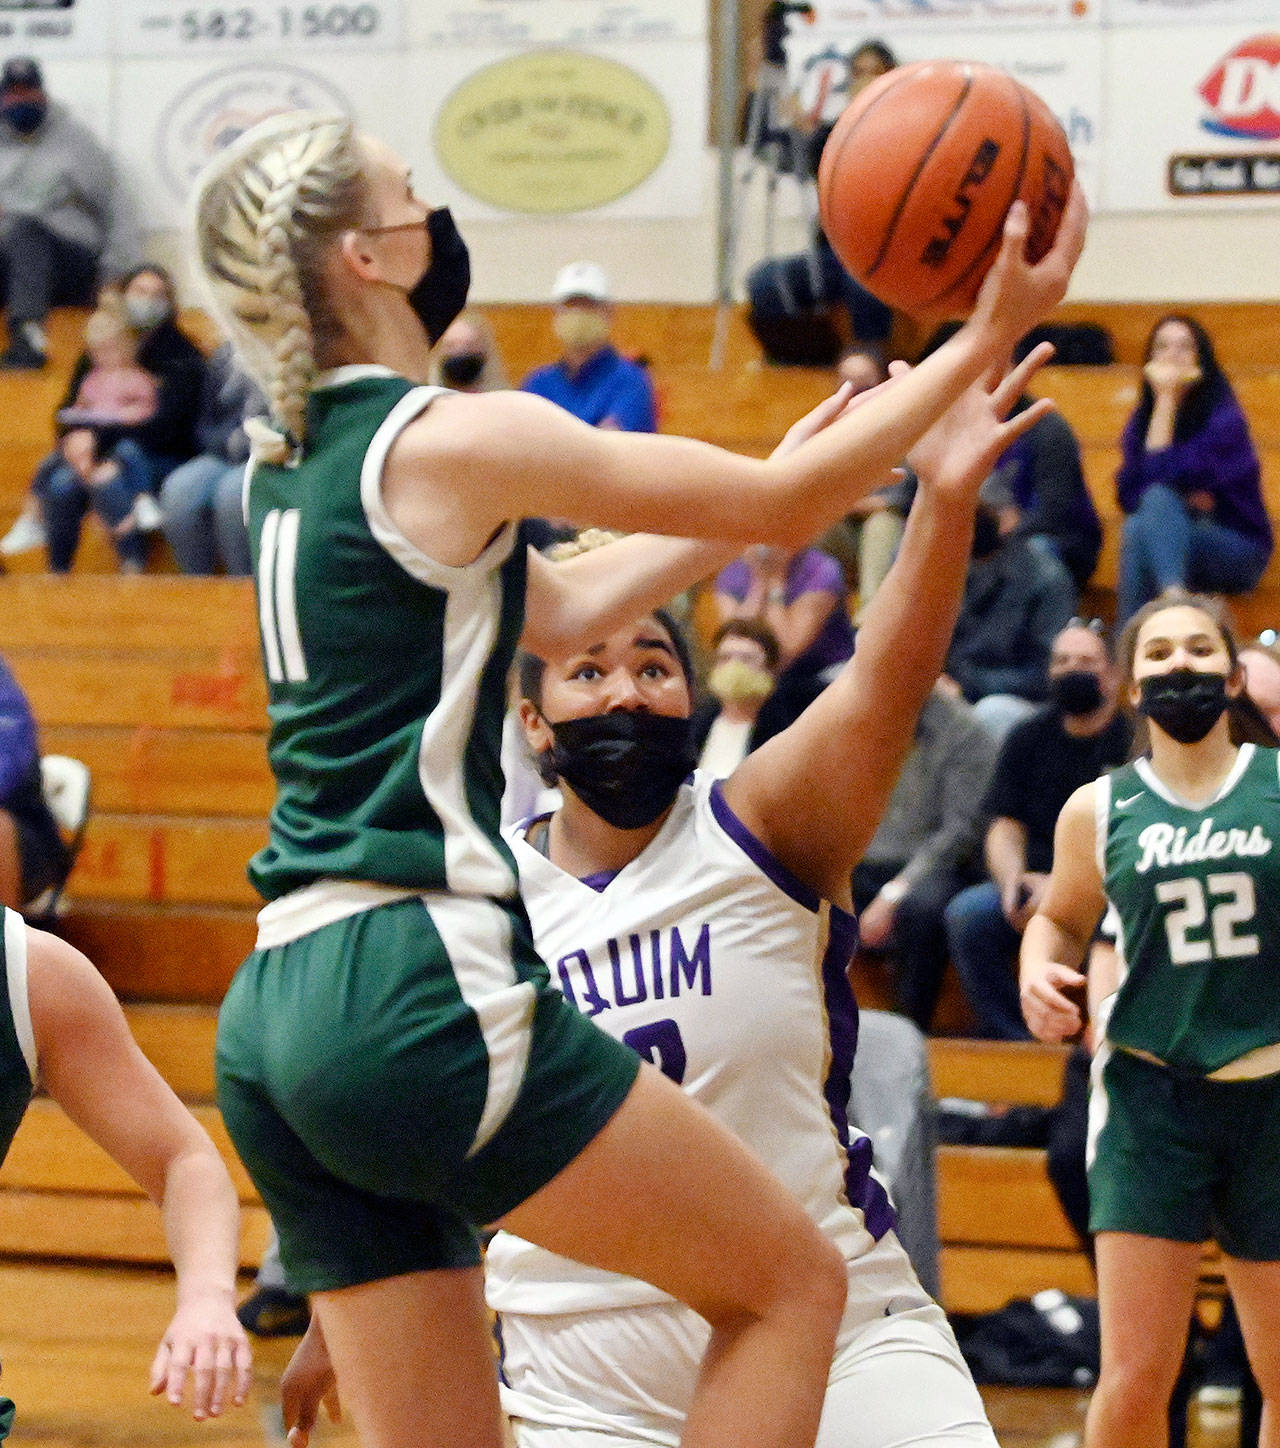 Port Angeles’ Millie Long goes up for a layup while defended by Sequim’s Jelissa Julmist during the Roughriders’ 67-58 win over the Wolves on Wednesday. (Michael Dashiell/Olympic Peninsula News Group)